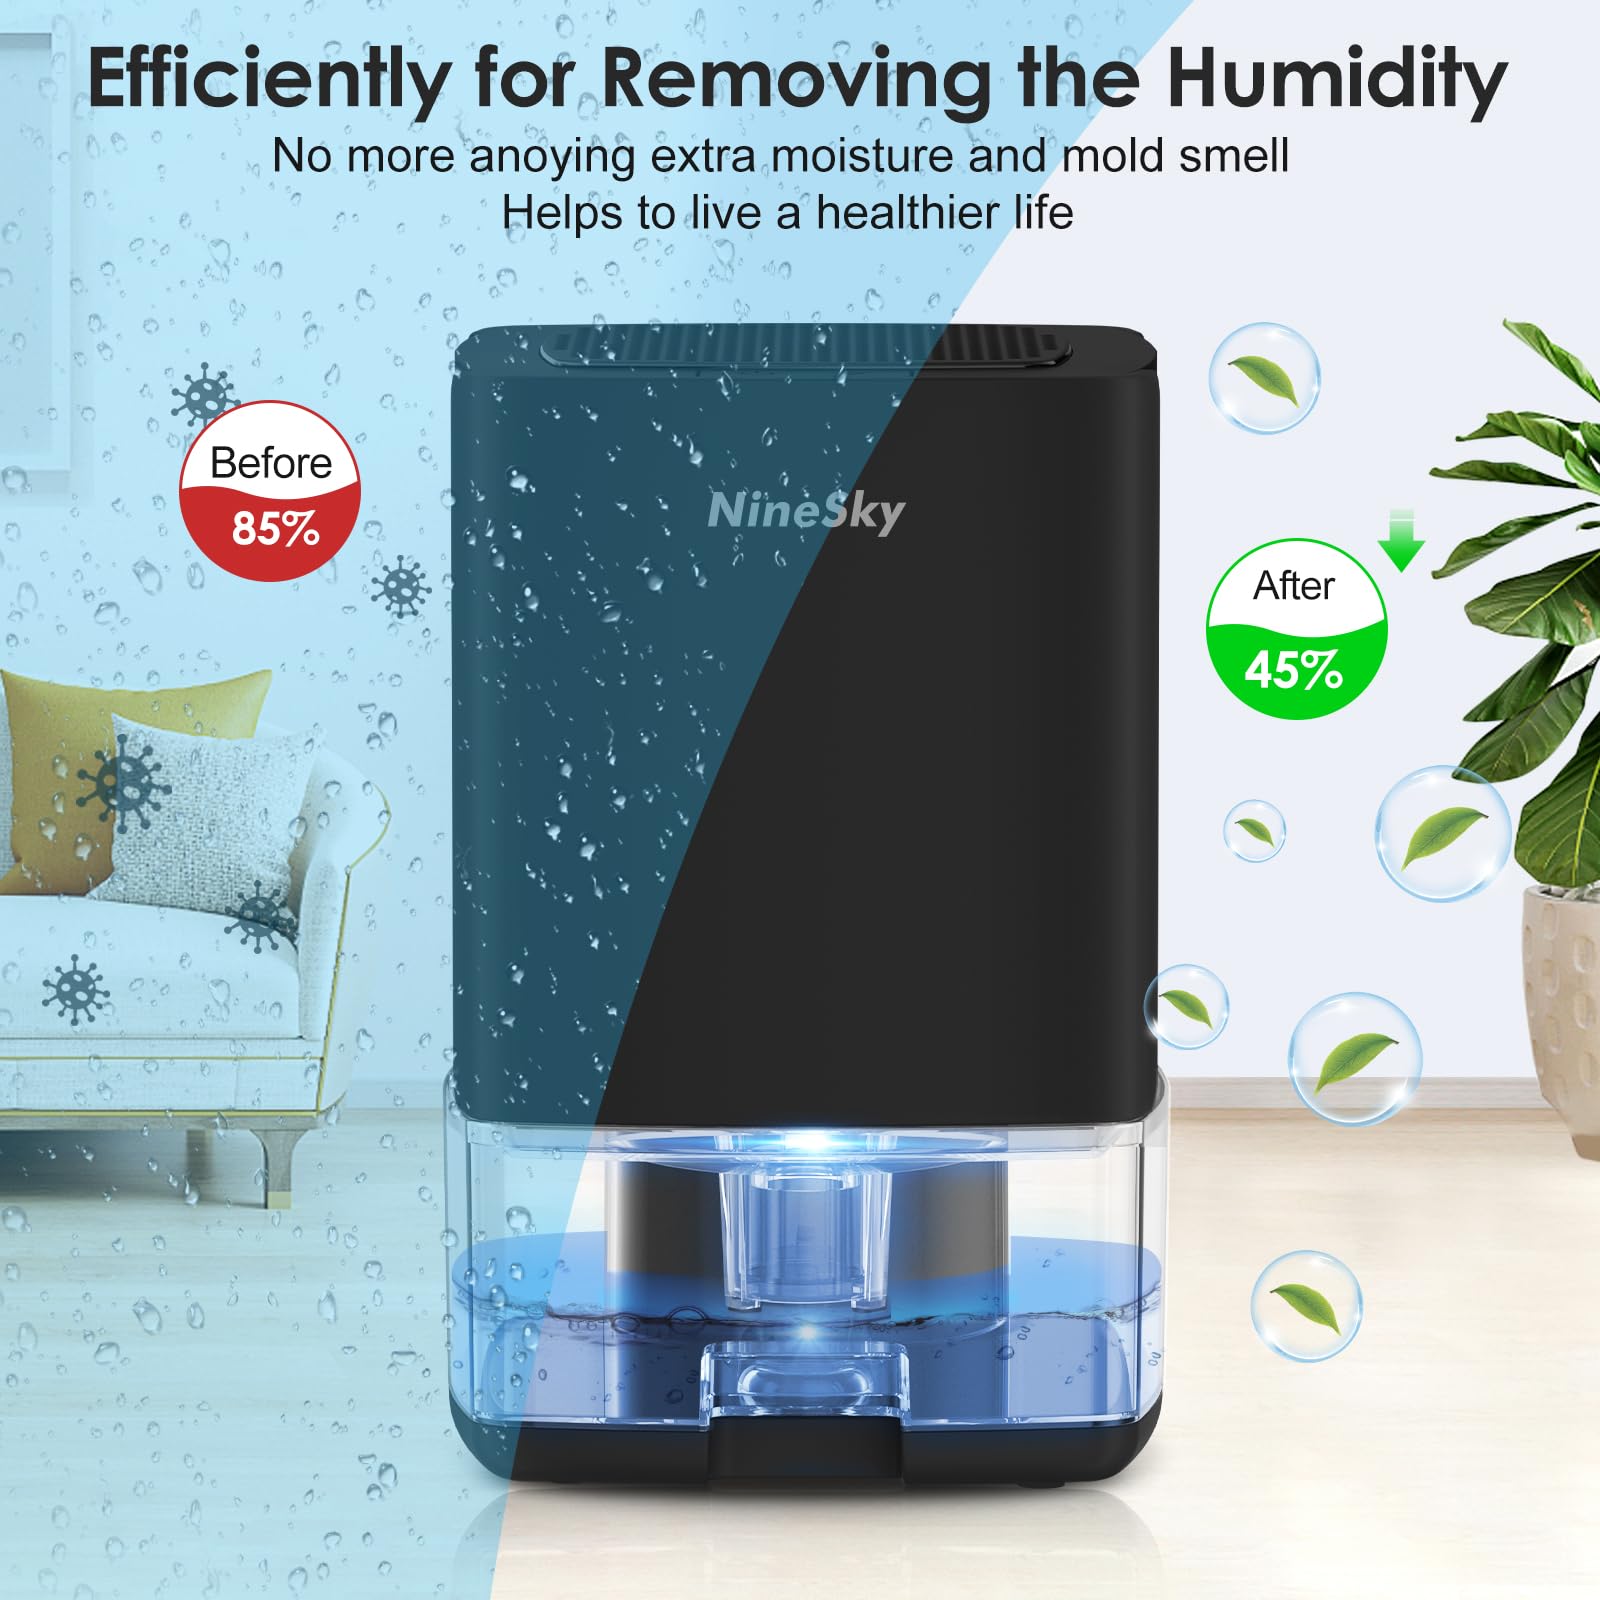 NineSky Dehumidifier for Home, 30oz Water Tank,(300 sq.ft) Dehumidifiers for Bedroom, Bathroom, Basement with 7 Colorful Lights, Auto Shut Off(C1 Black)